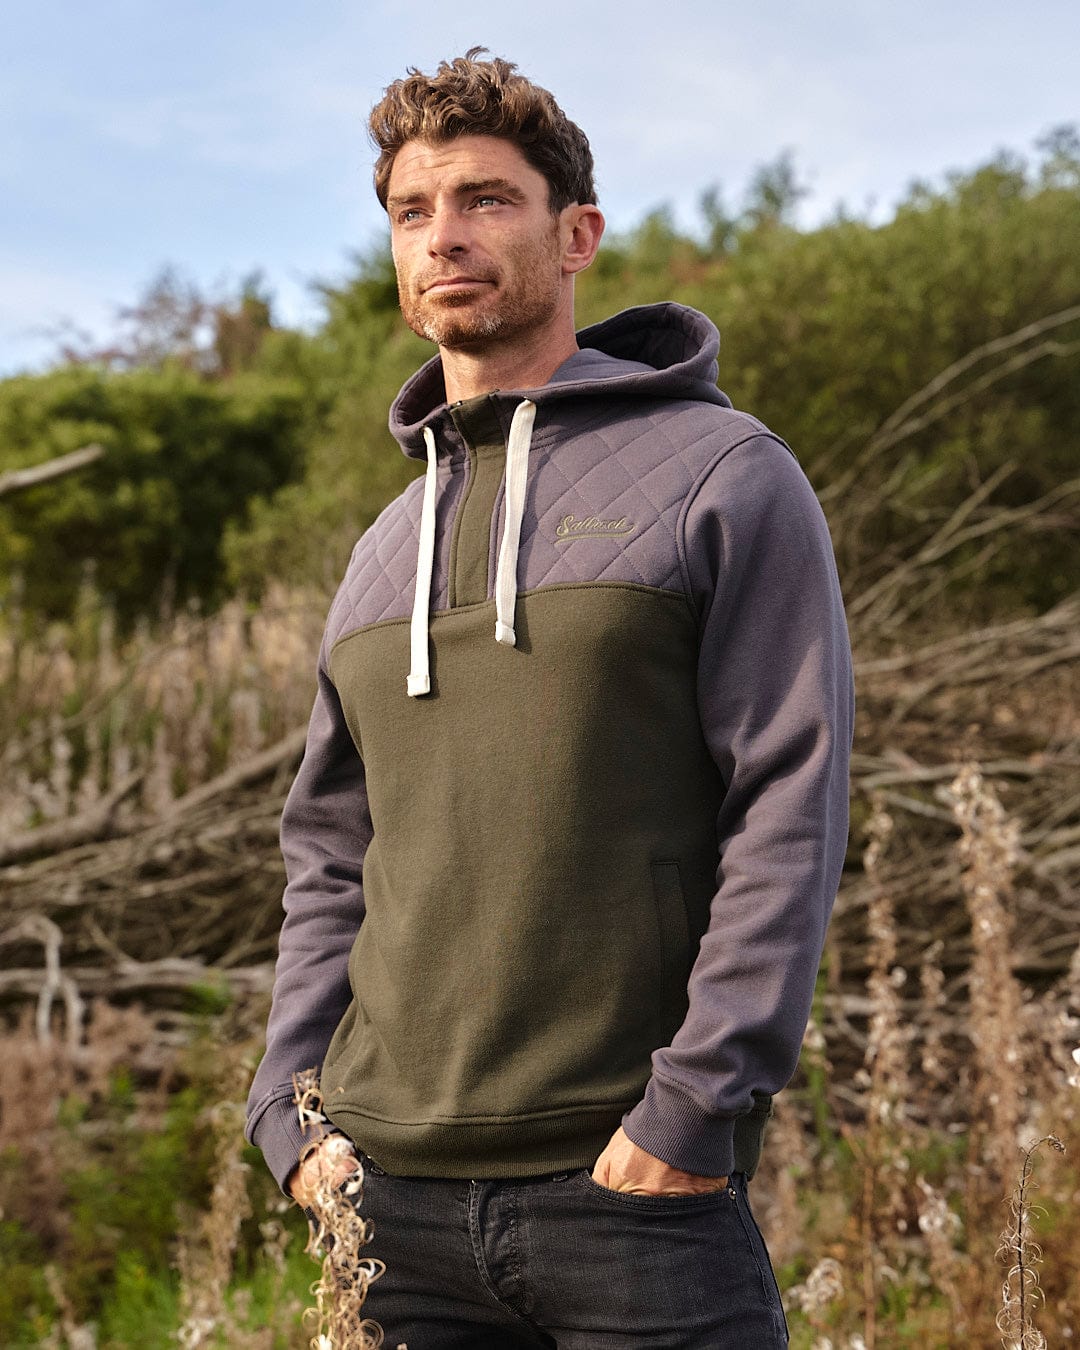 A man standing outdoors in a field, finding warmth and comfort with the Saltrock Aiken Mens 1/4 Neck Hoodie - Green.